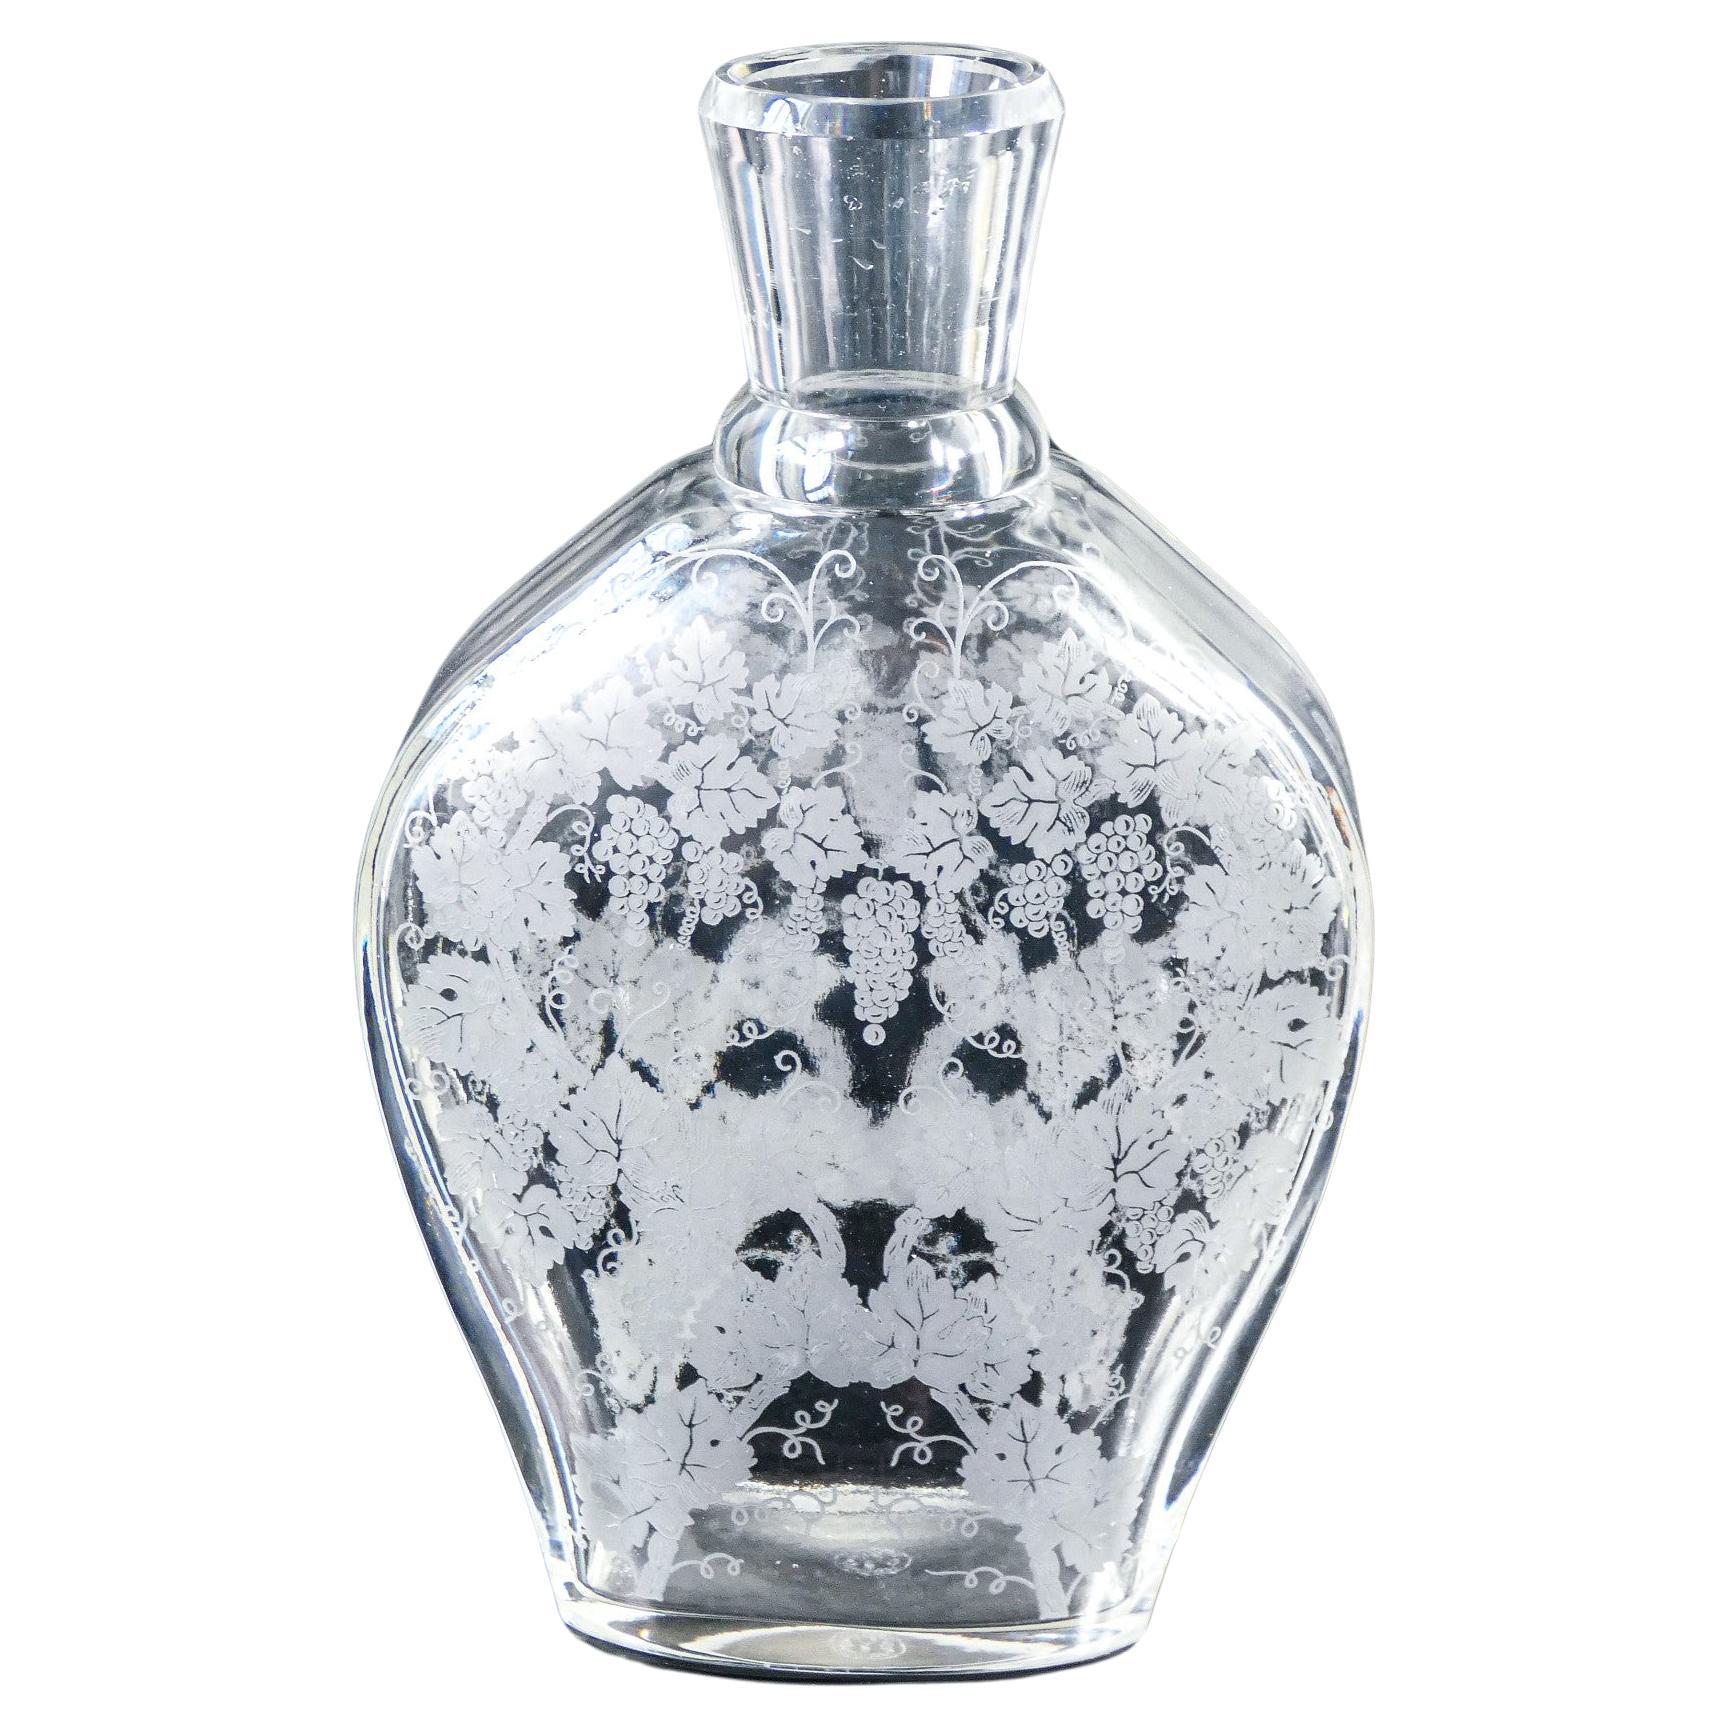 BACCARAT crystal bottle, motif depicting a vine and bunches of grapes